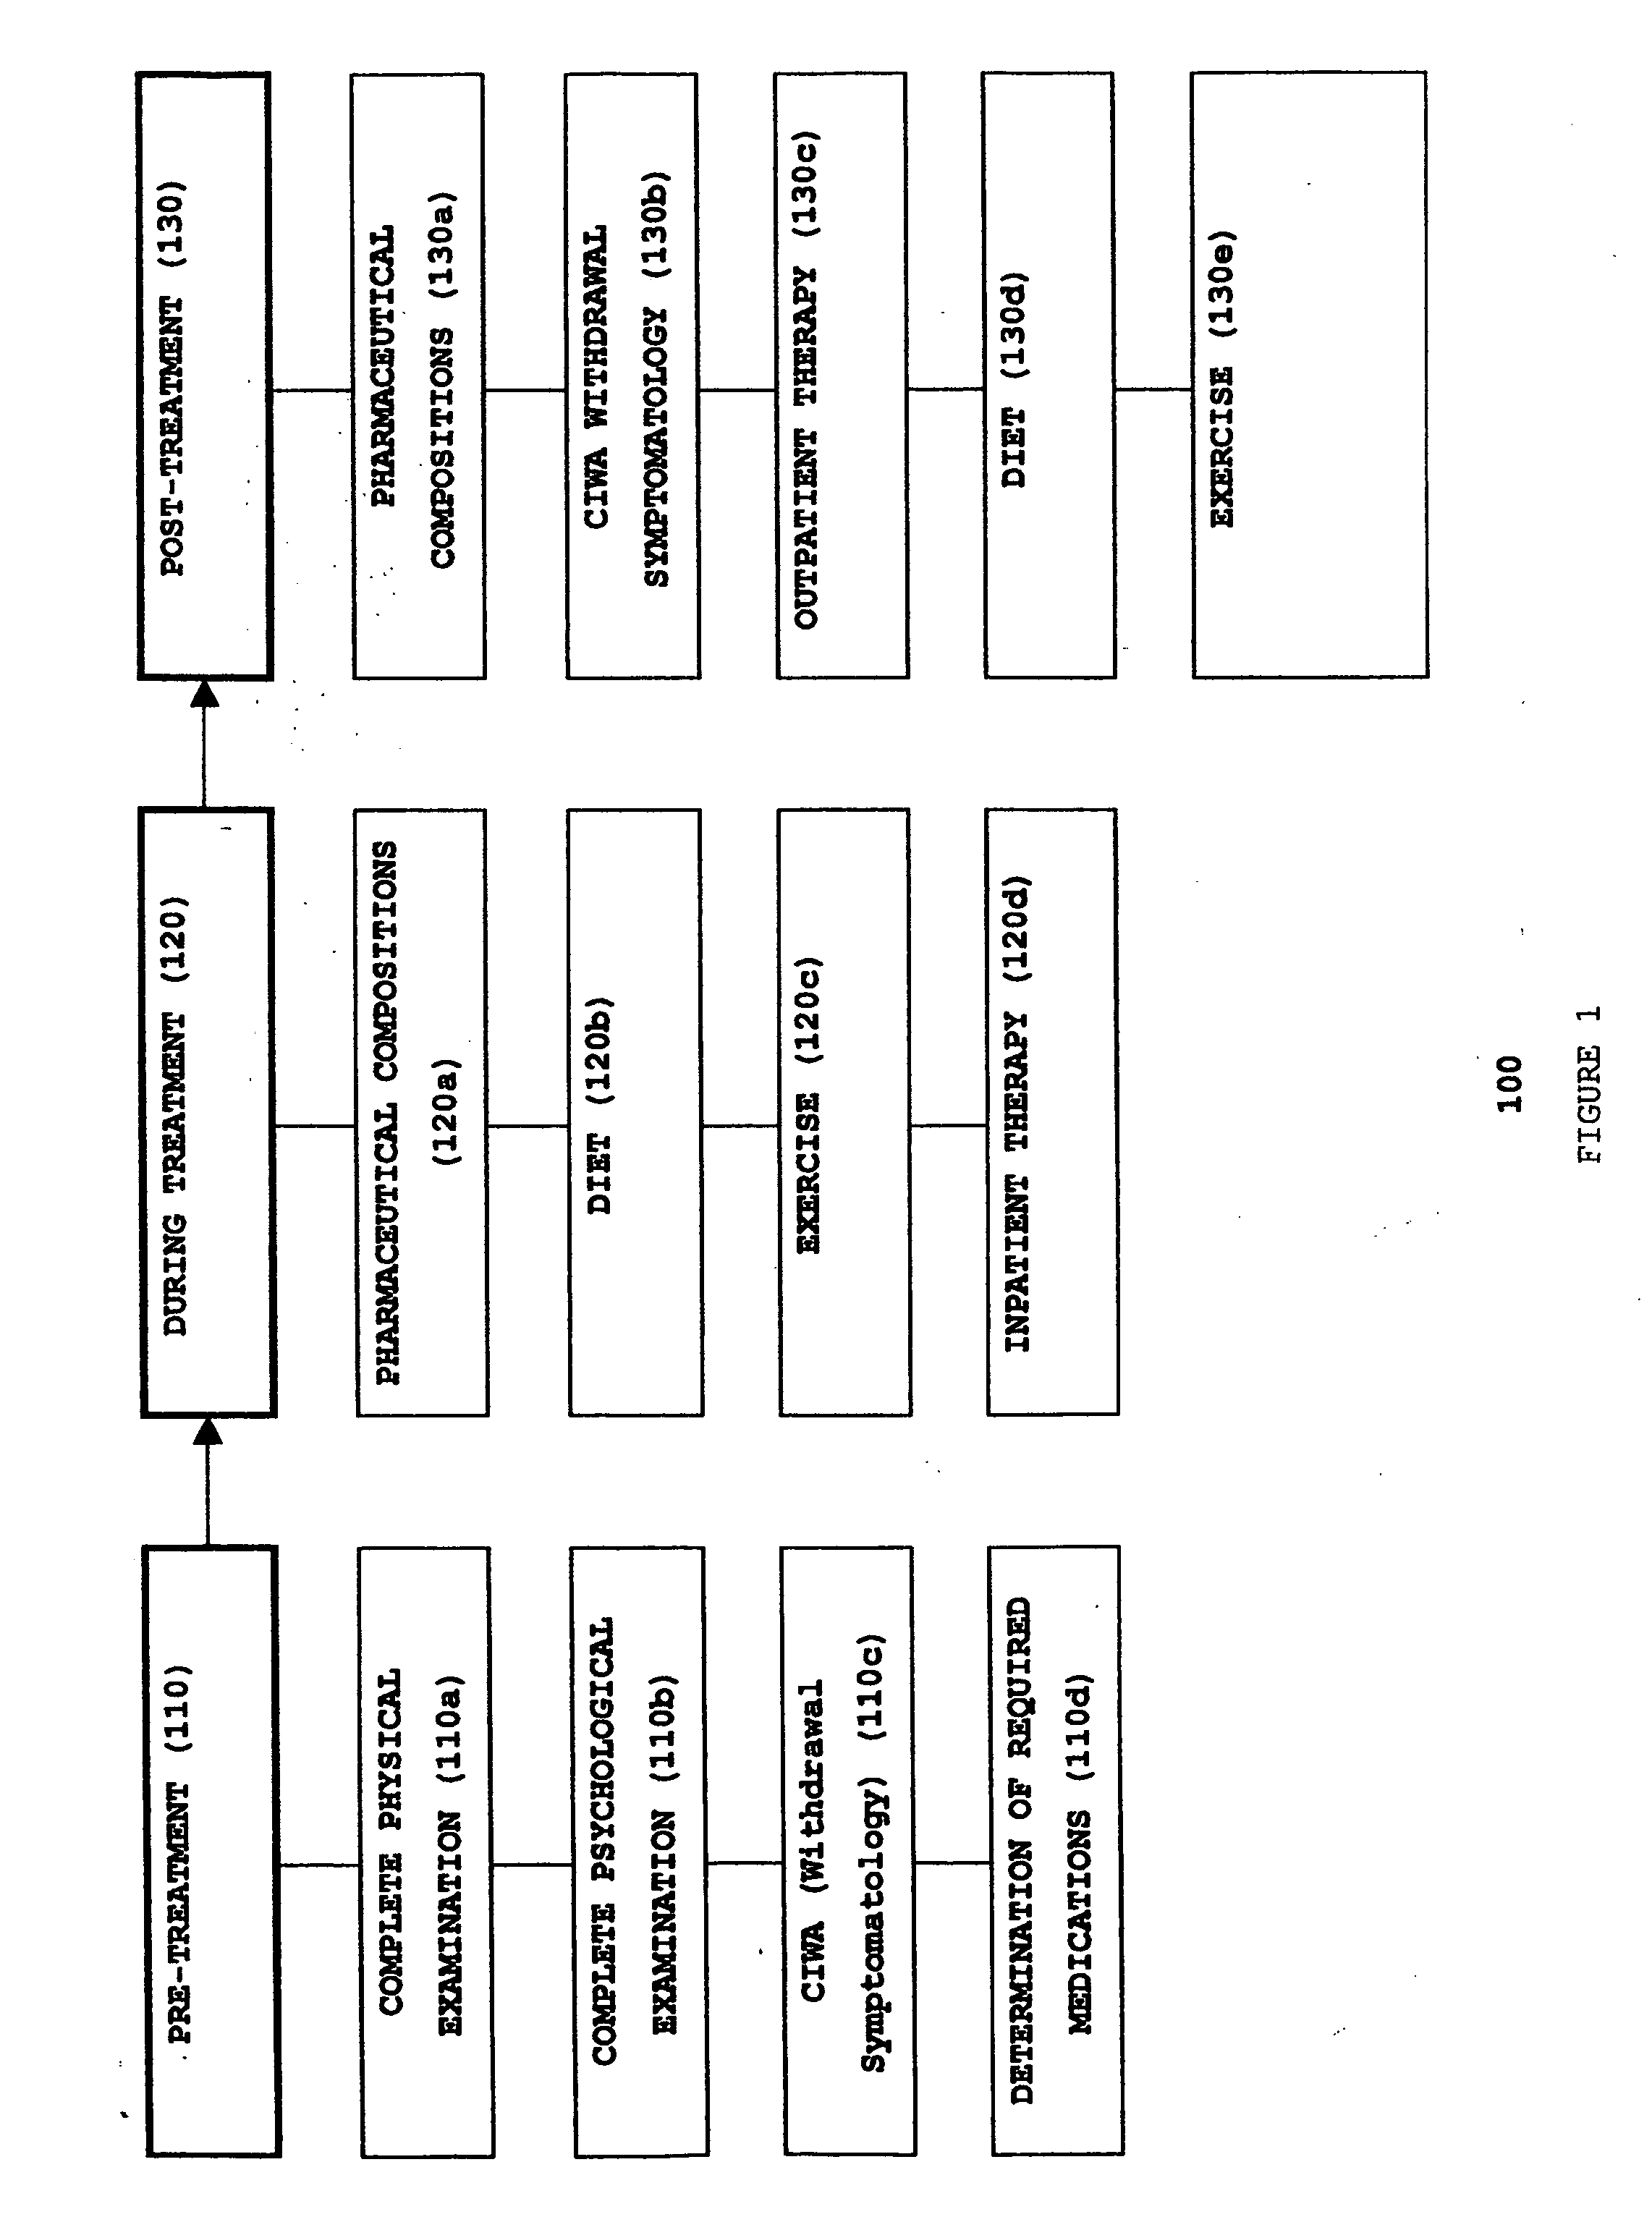 Use of selective chloride channel modulators to treat alcohol and/or stimulant substance abuse